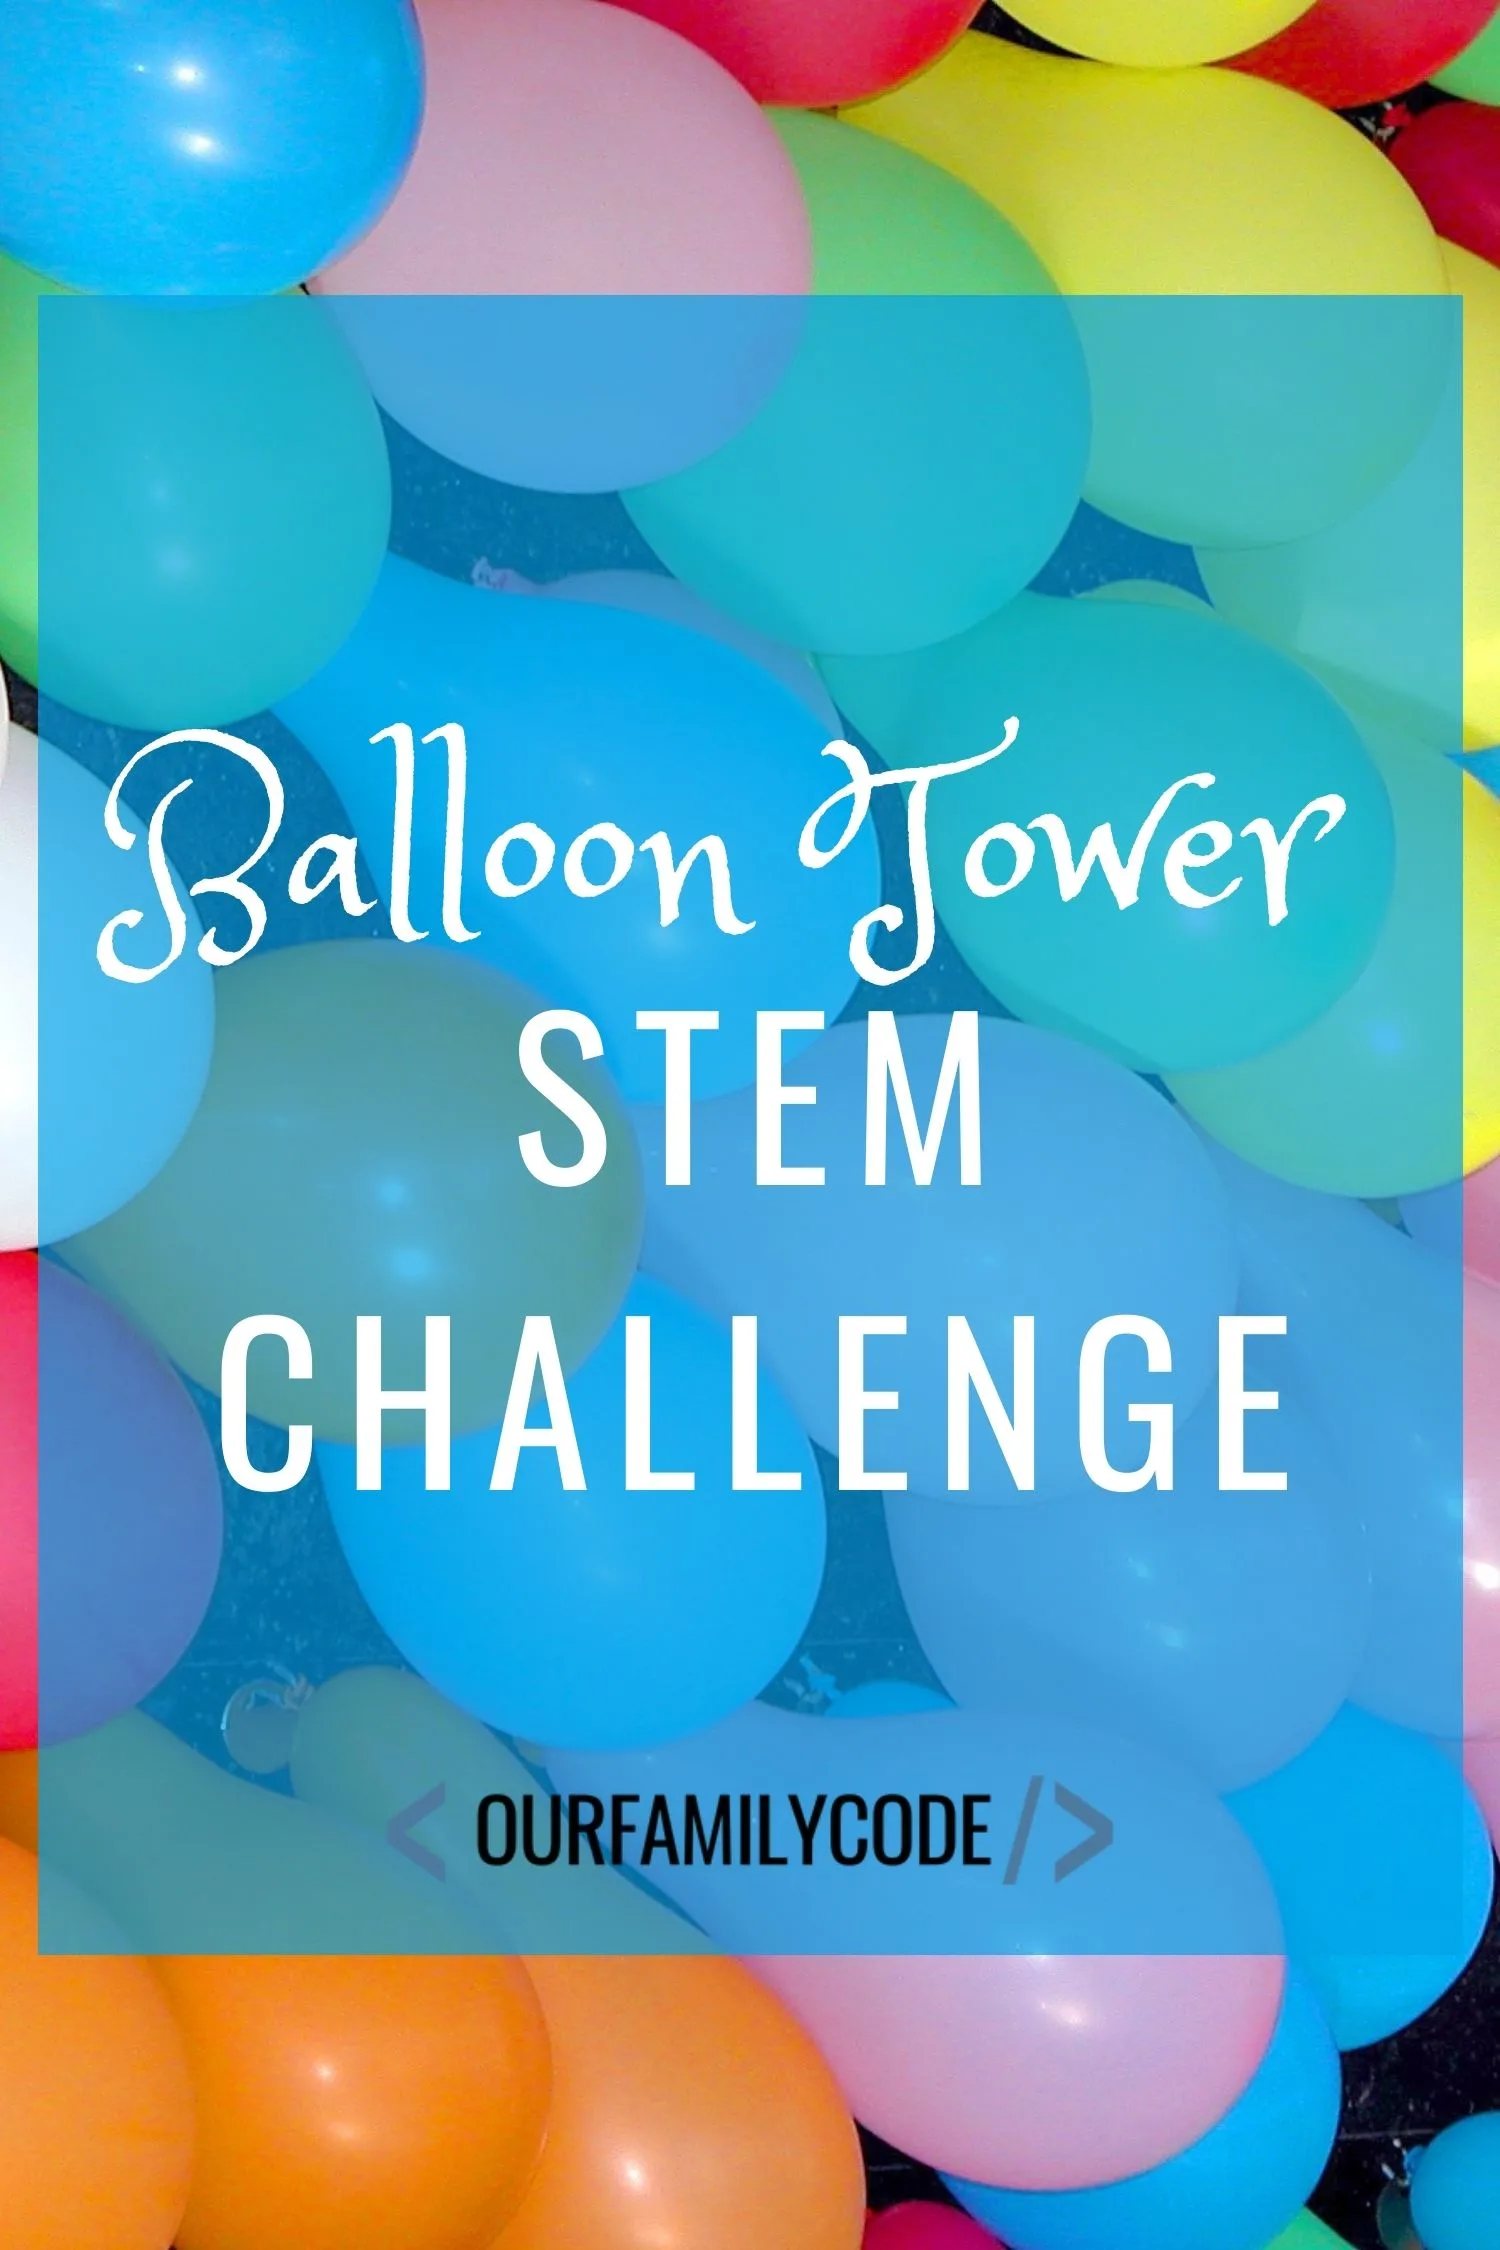 A picture of balloons with Balloon Tower STEM challenge written in text.